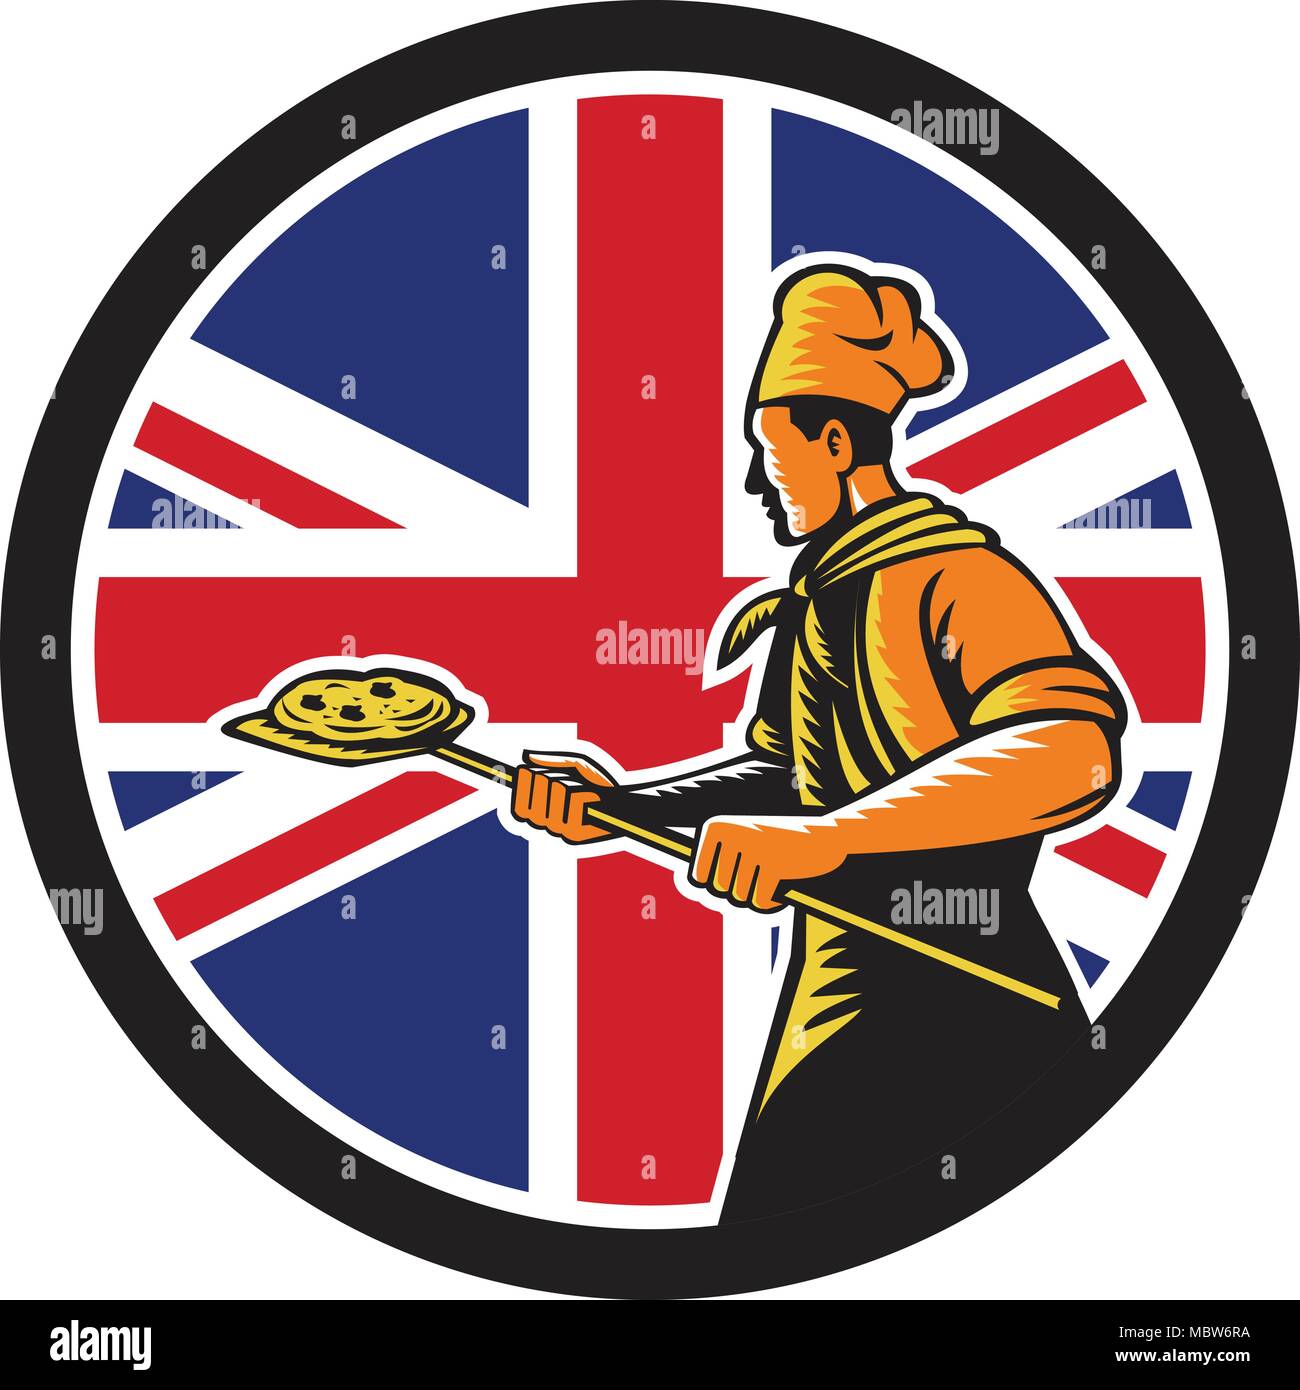 Icon retro style illustration of a British pizza baker chef holding peel viewed from side with United Kingdom UK, Great Britain Union Jack flag set in Stock Vector